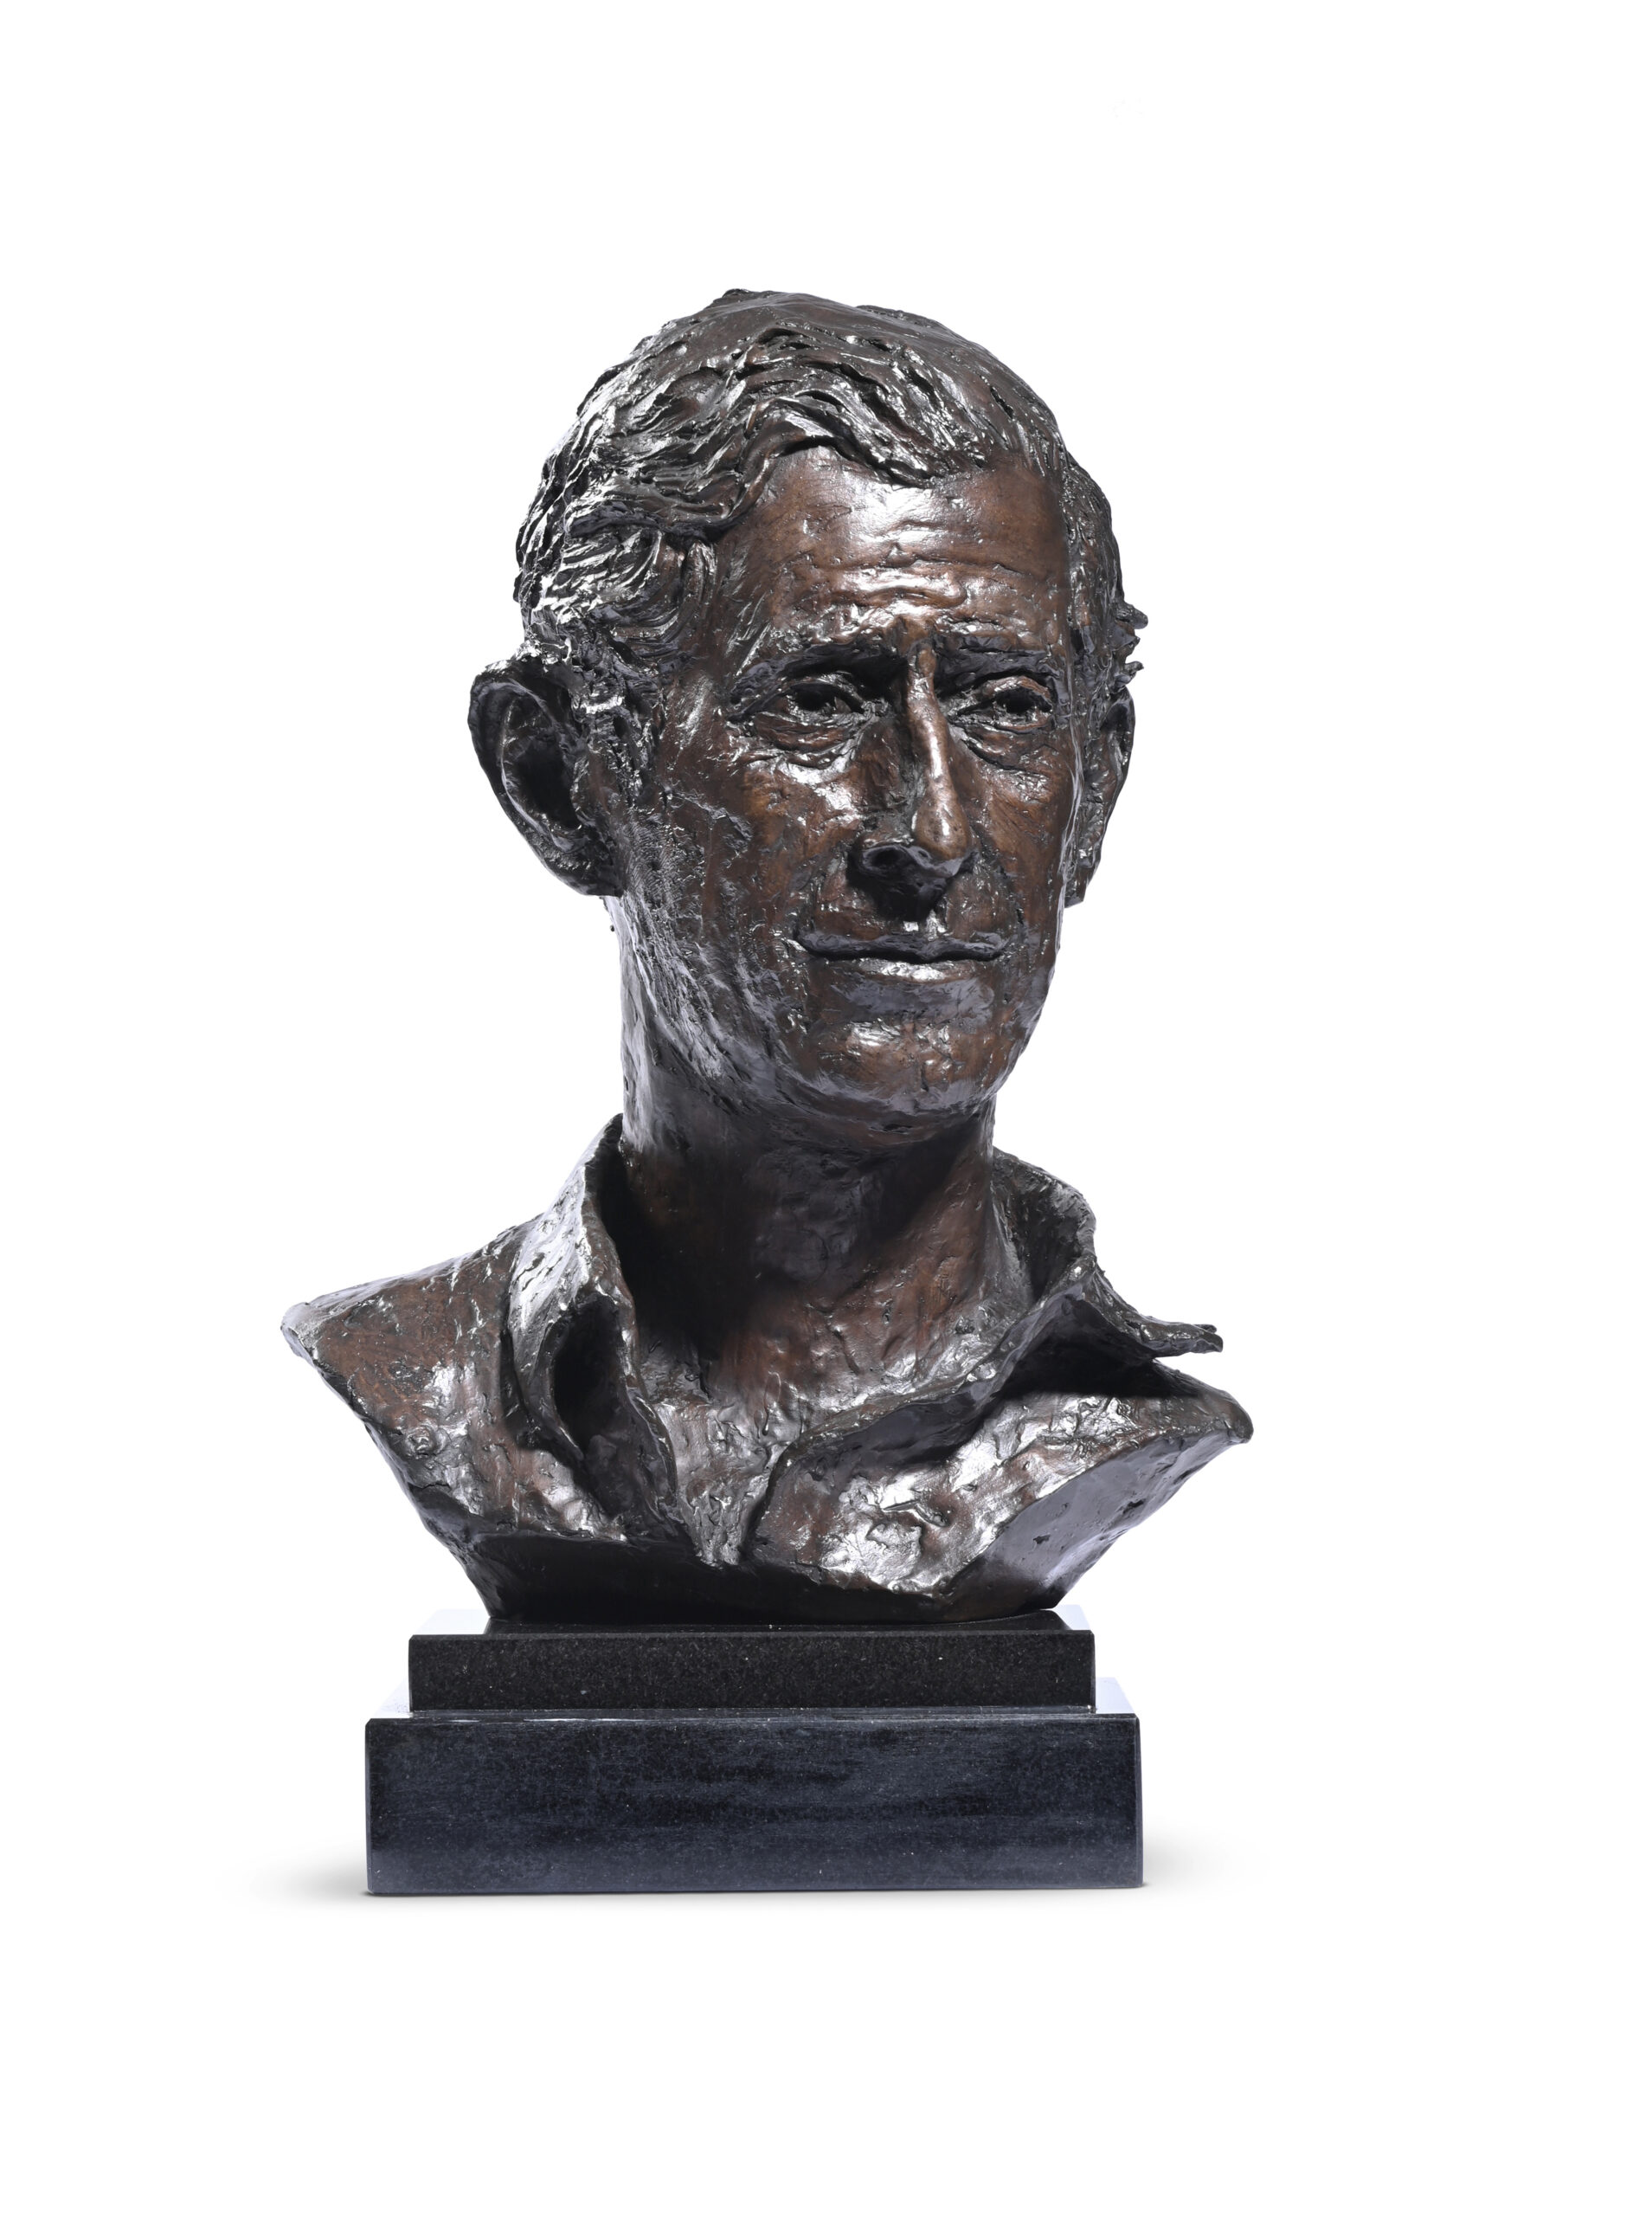 A bust of King Charles III by the sculptor Angela Conner